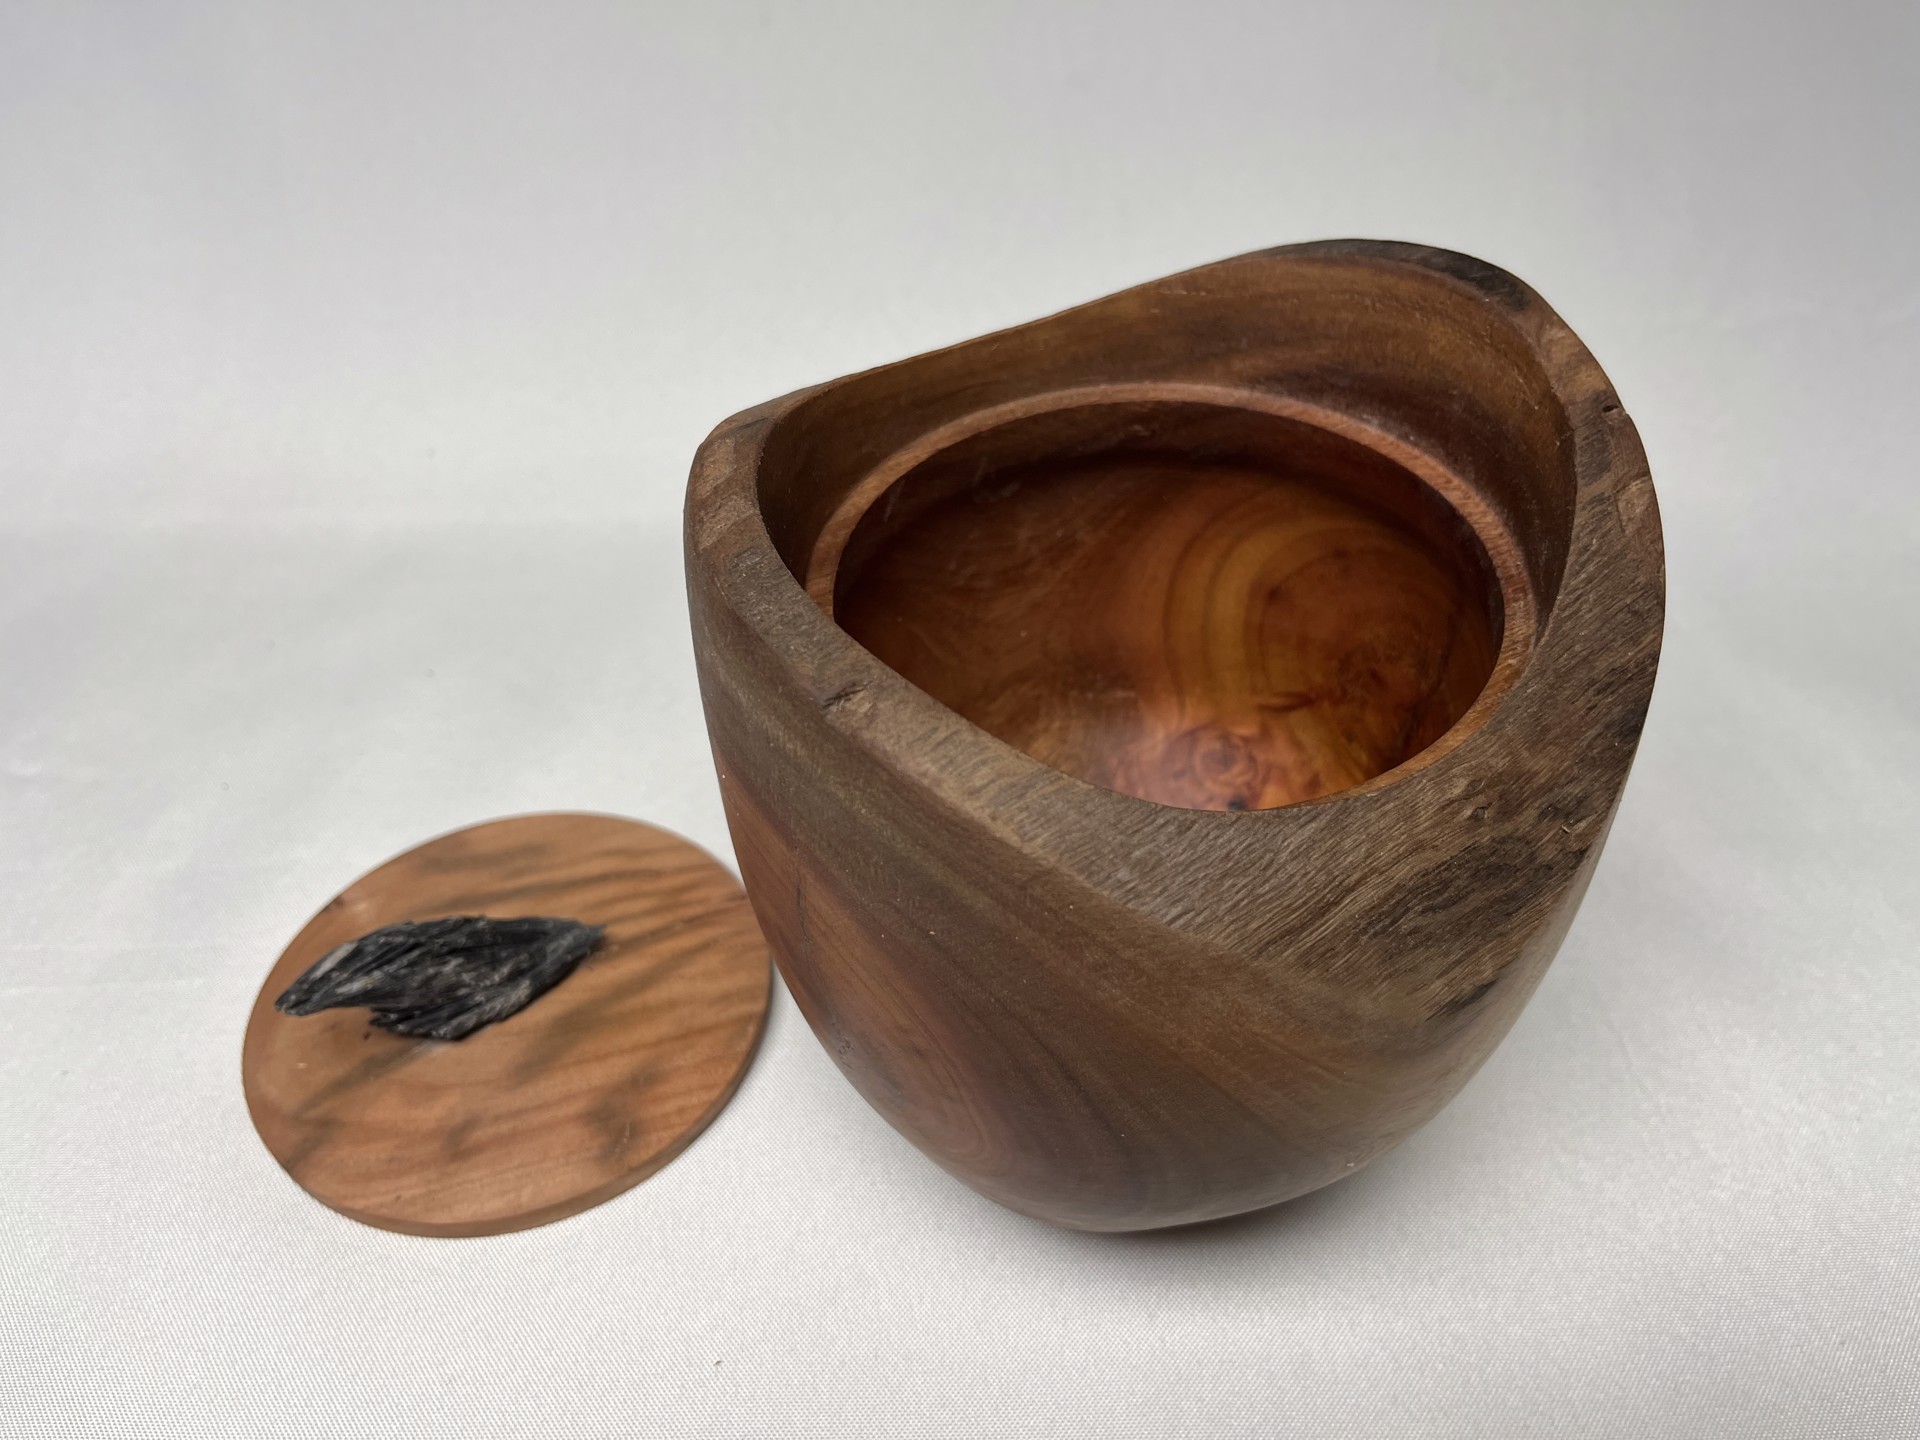 Turned Wood Jar W/Lid #23-28 by Rick Squires